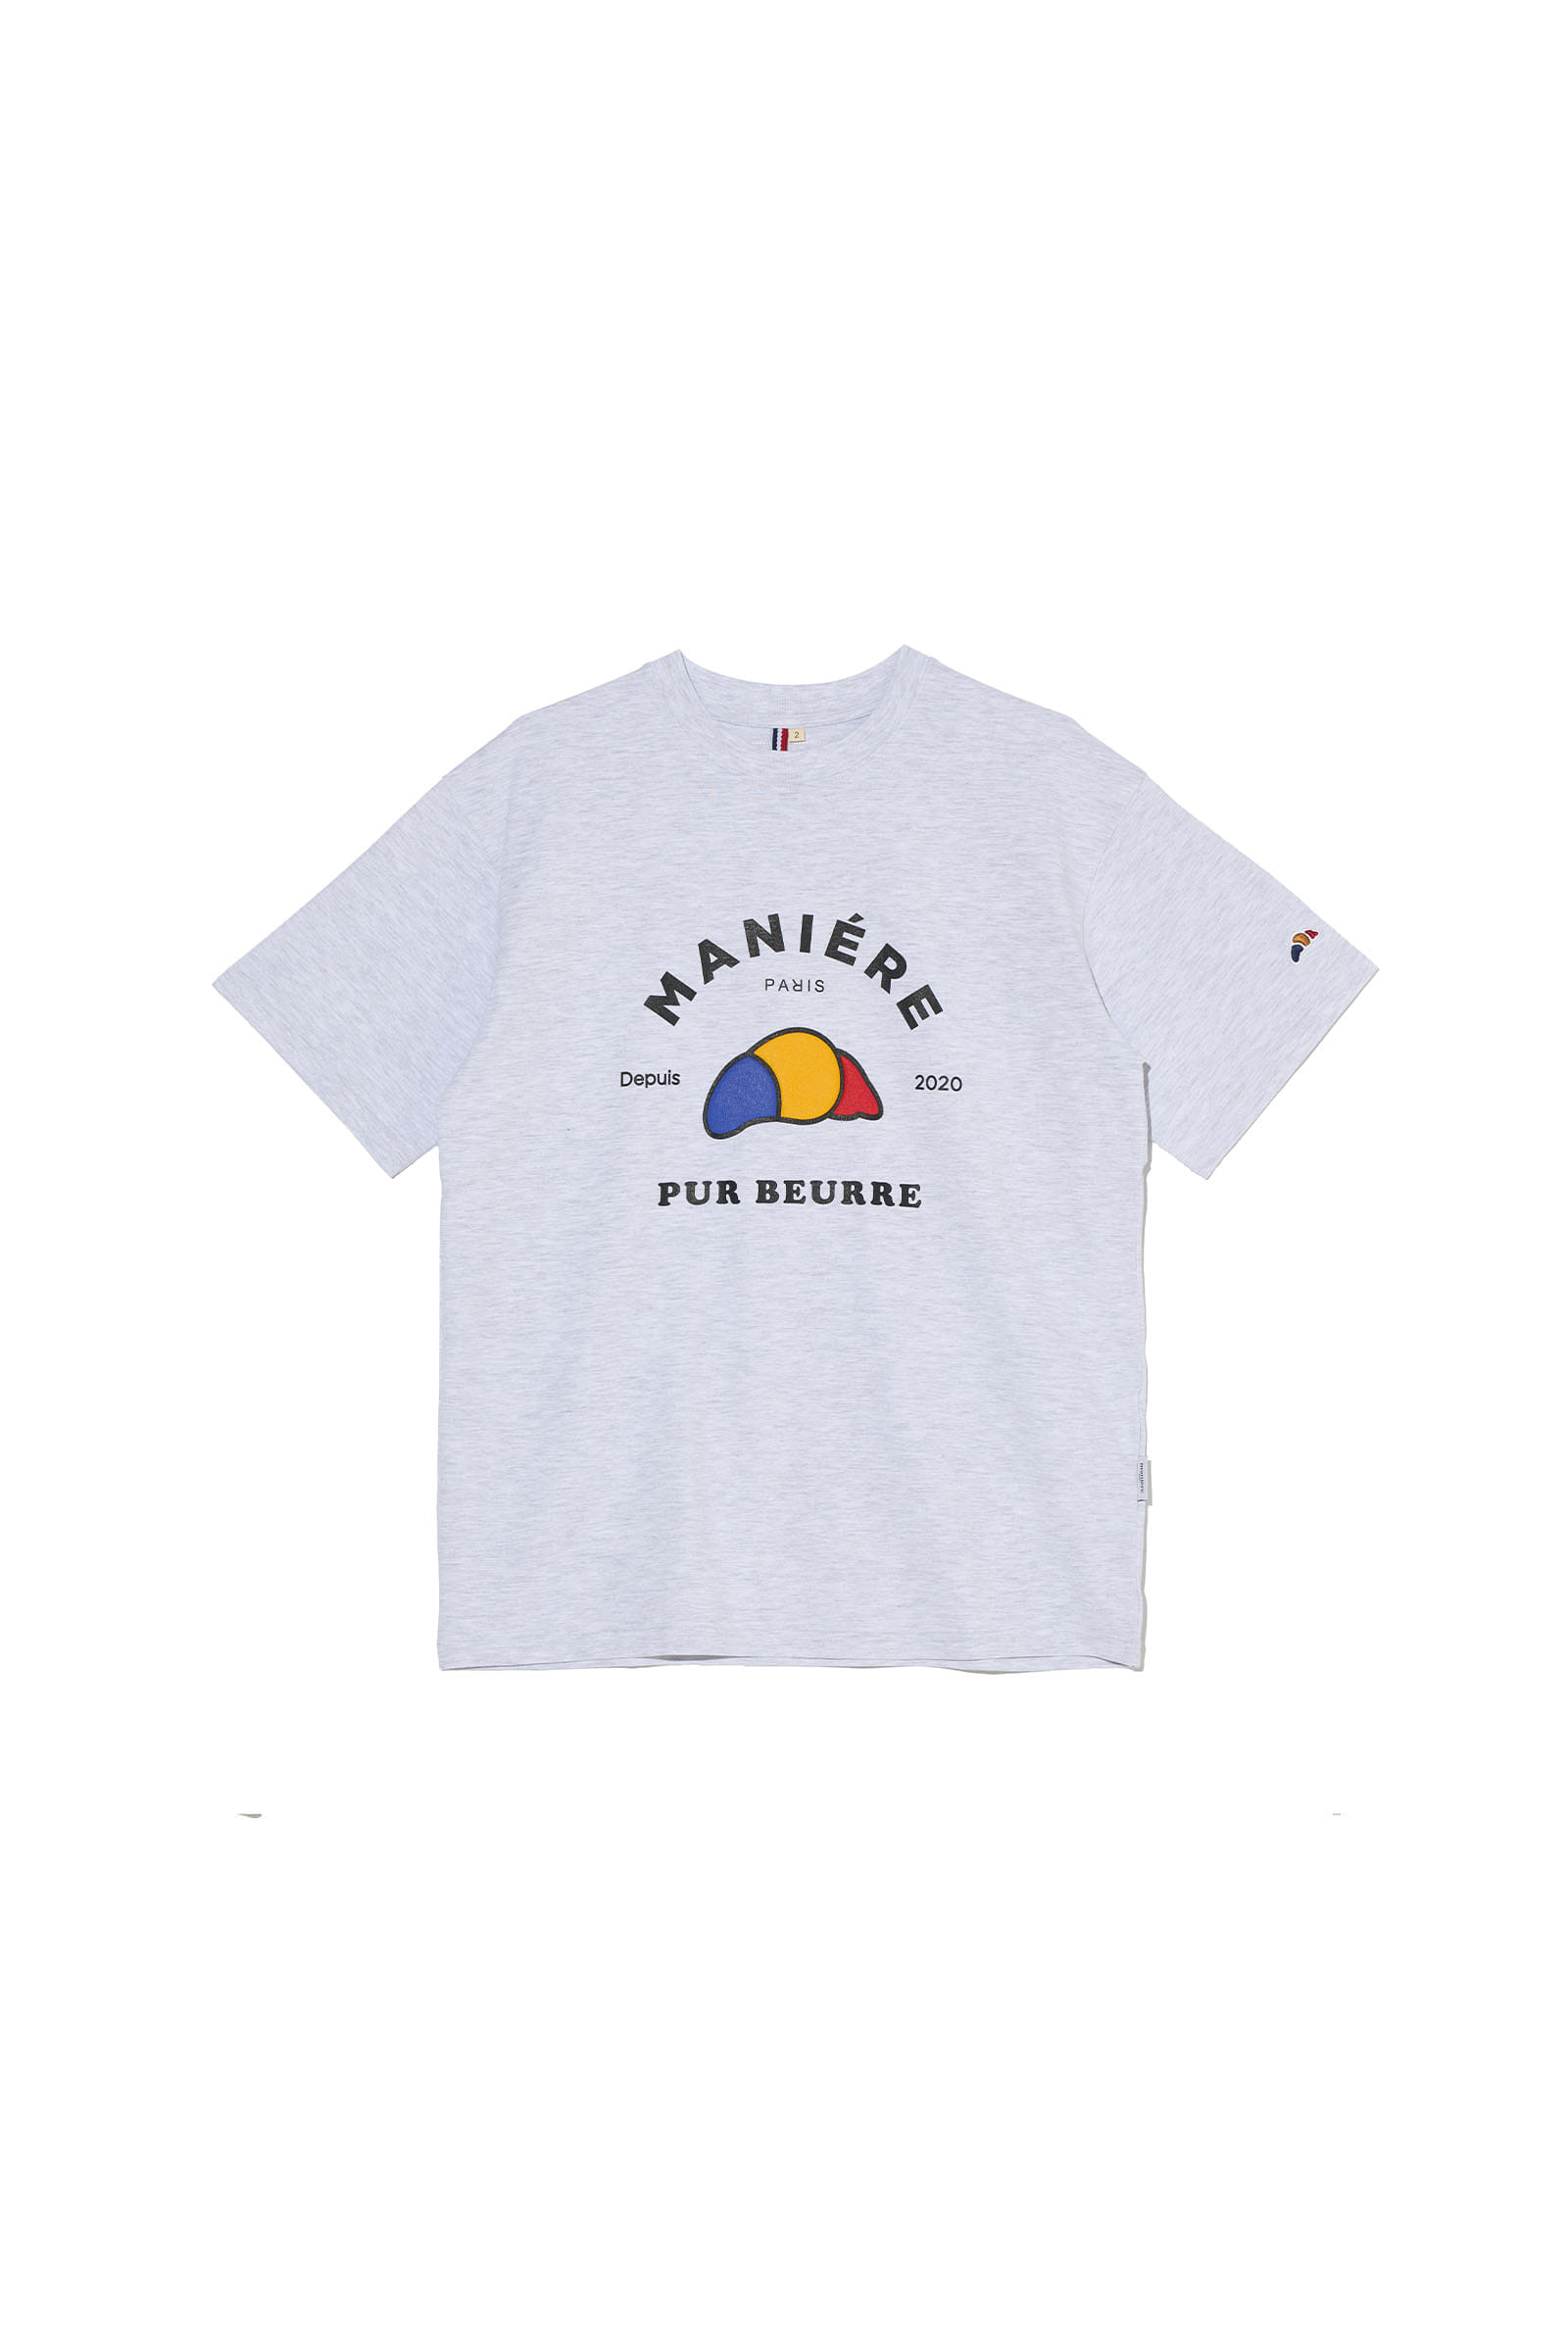 ep.6 Croissant patch T-shirts (Cool Gray)